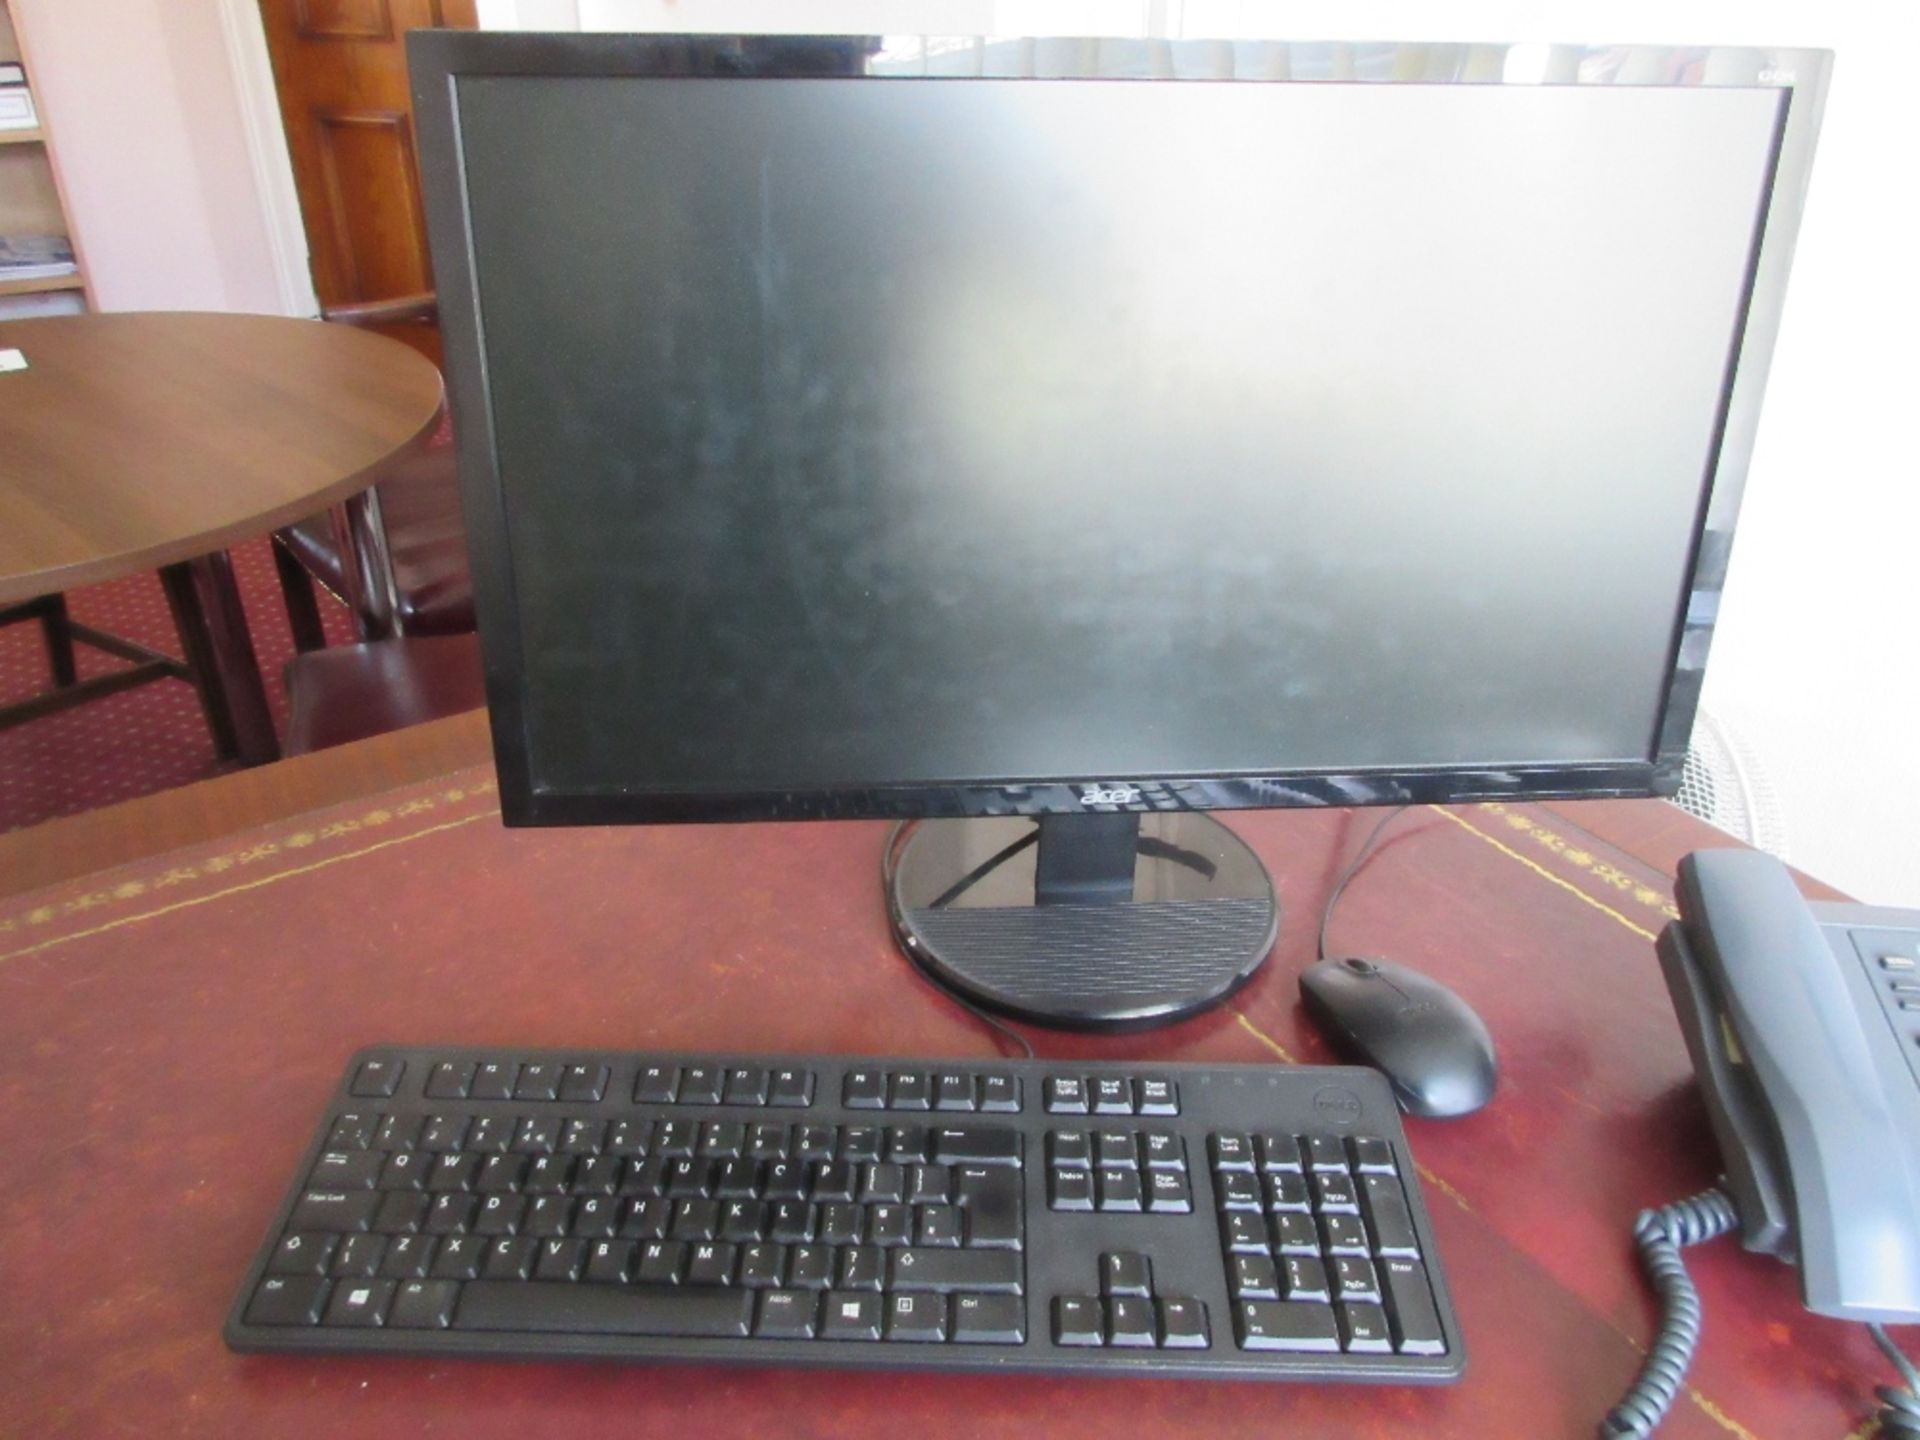 Dell Vostro mini tower PC, flat screen keyboard and mouse incorporating i3-2120 processor, 4GB Memor - Image 2 of 2